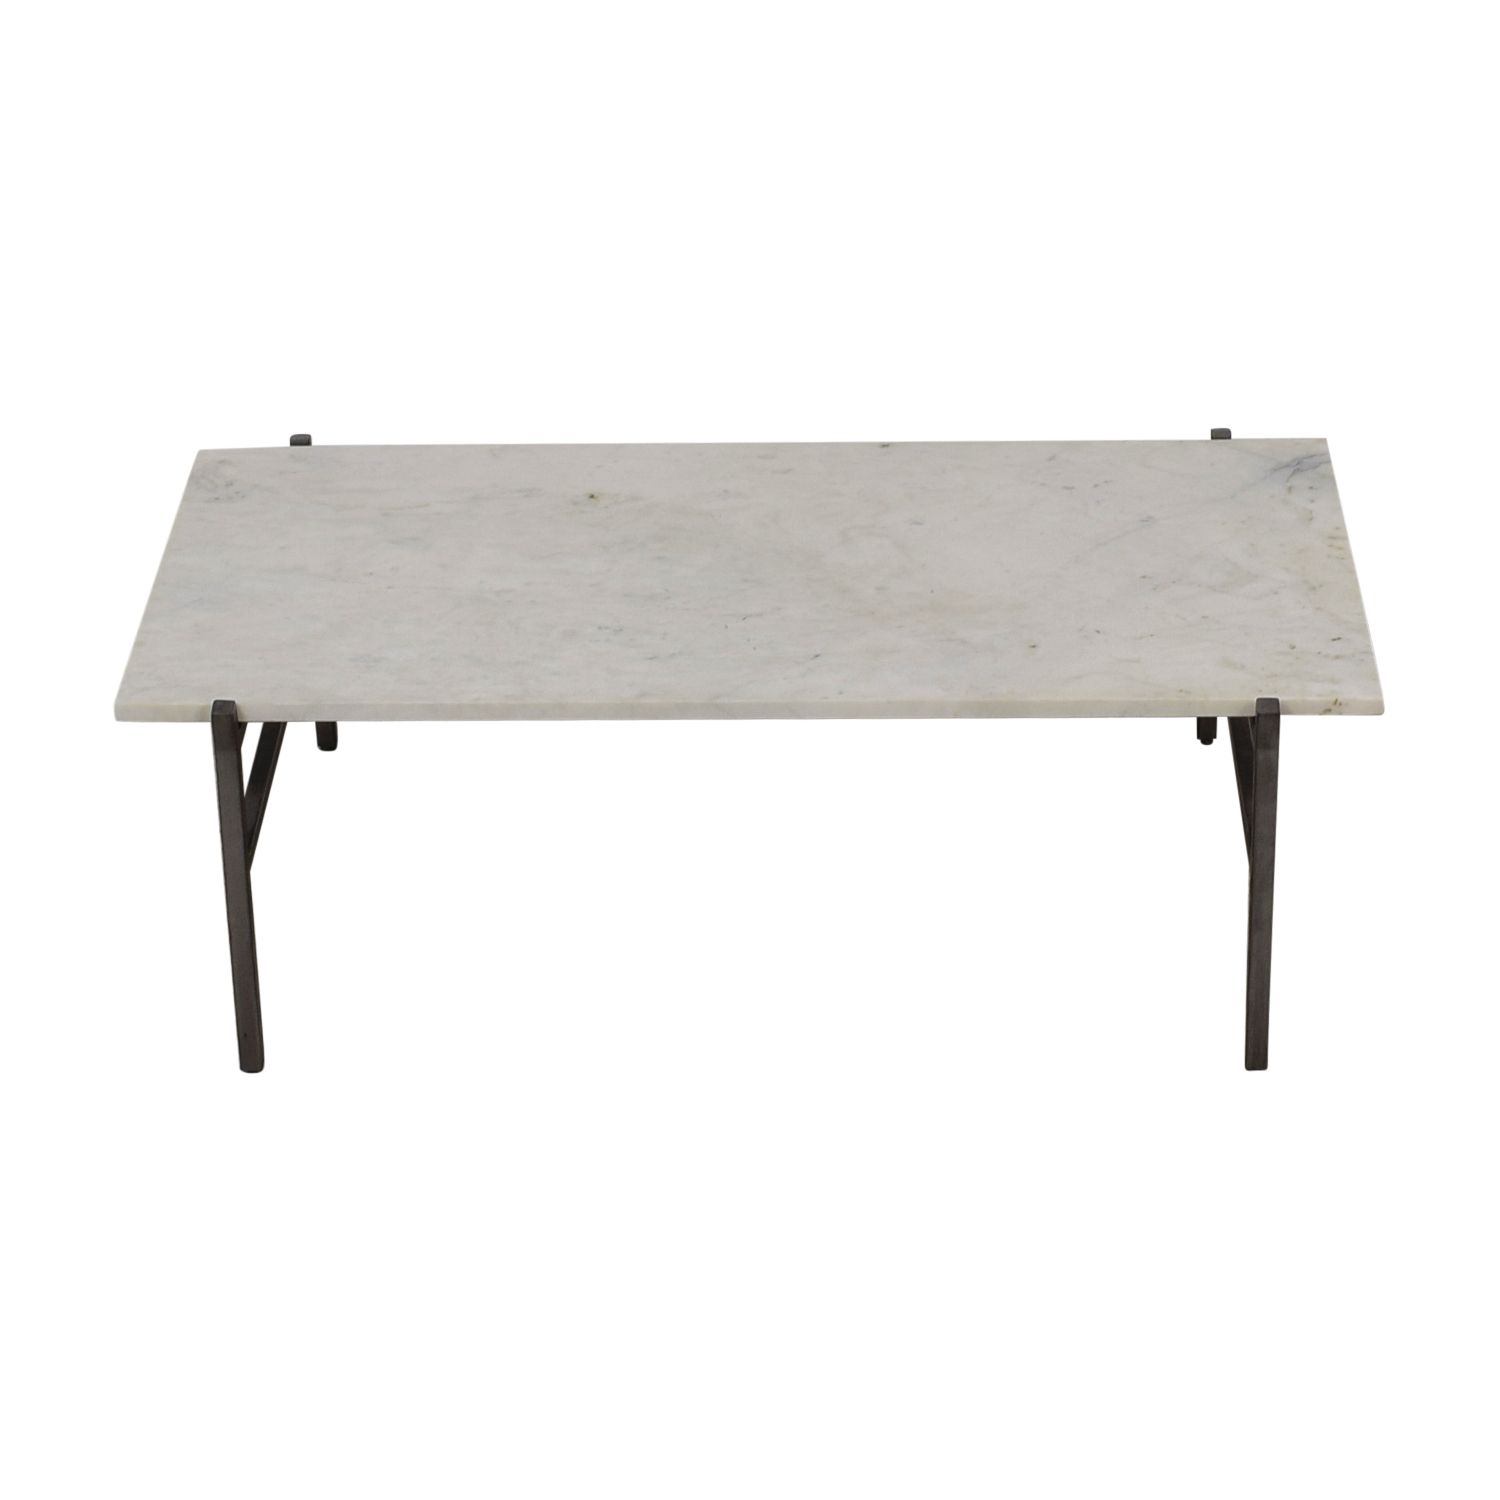 [%37% Off – Industrial Wood Coffee Table / Tables Inside Most Current Large Slab Marble Coffee Tables With Antiqued Silver Base|large Slab Marble Coffee Tables With Antiqued Silver Base Intended For Most Recent 37% Off – Industrial Wood Coffee Table / Tables|2018 Large Slab Marble Coffee Tables With Antiqued Silver Base In 37% Off – Industrial Wood Coffee Table / Tables|2018 37% Off – Industrial Wood Coffee Table / Tables Regarding Large Slab Marble Coffee Tables With Antiqued Silver Base%] (View 5 of 20)